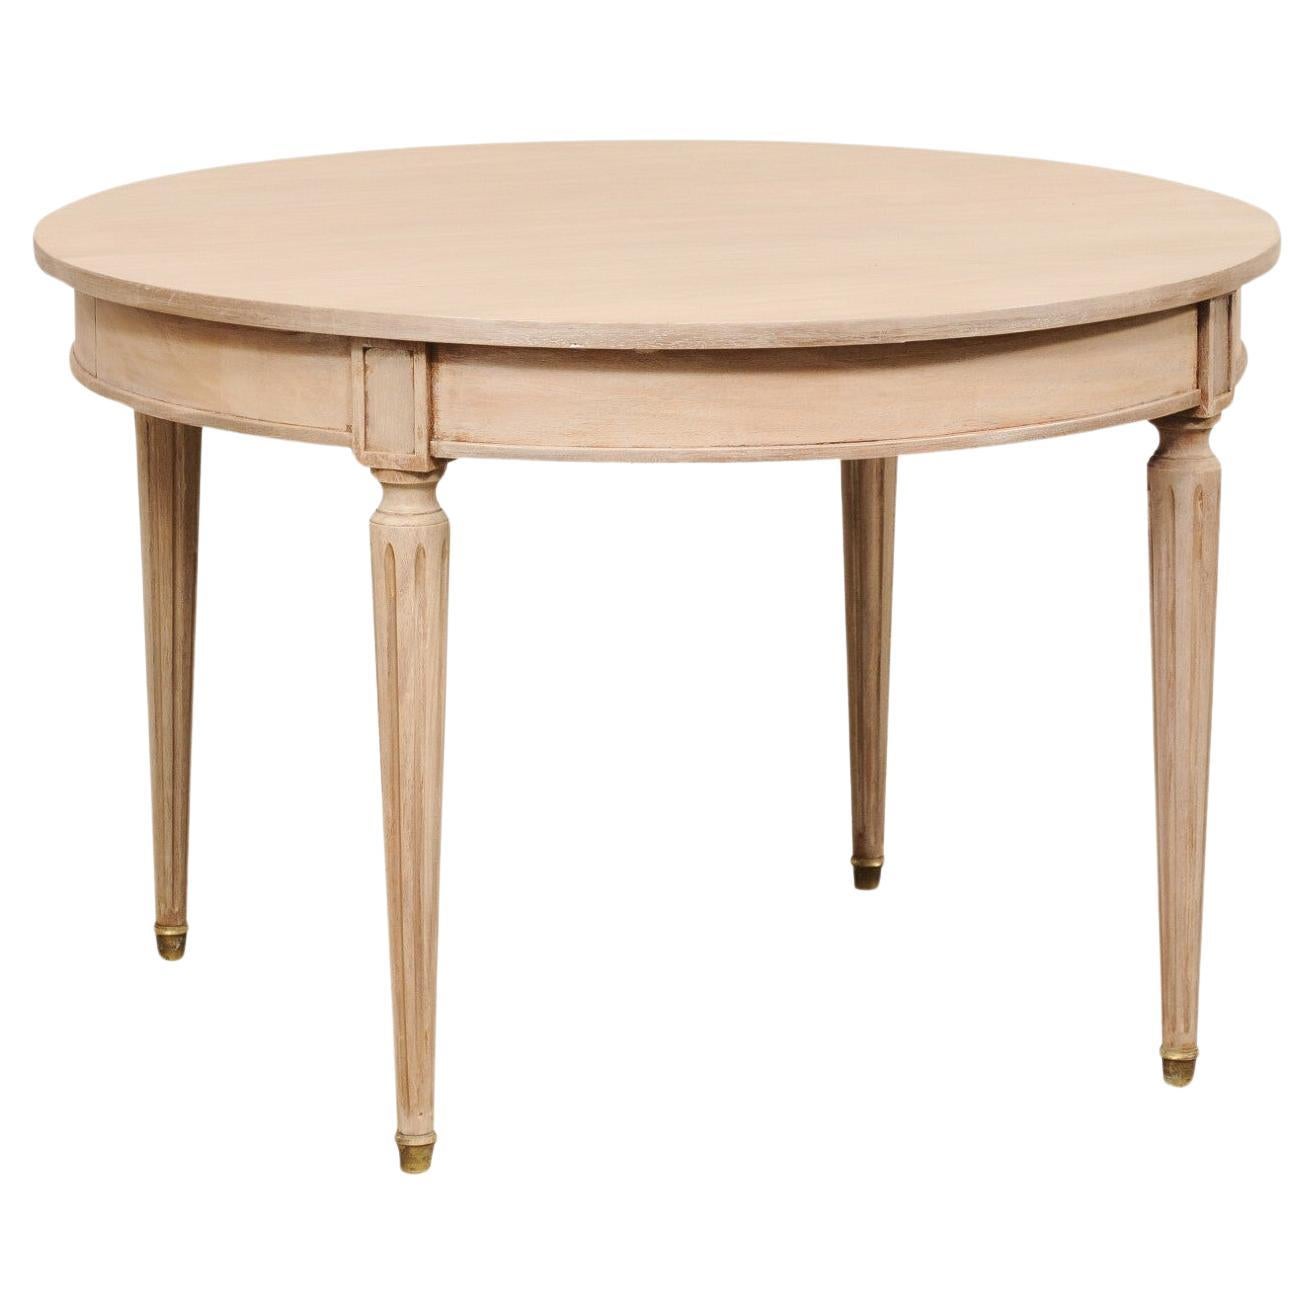 French Round Painted Wood Table w/Fluted Legs & Brass Feet, 3.5 Ft Diameter For Sale